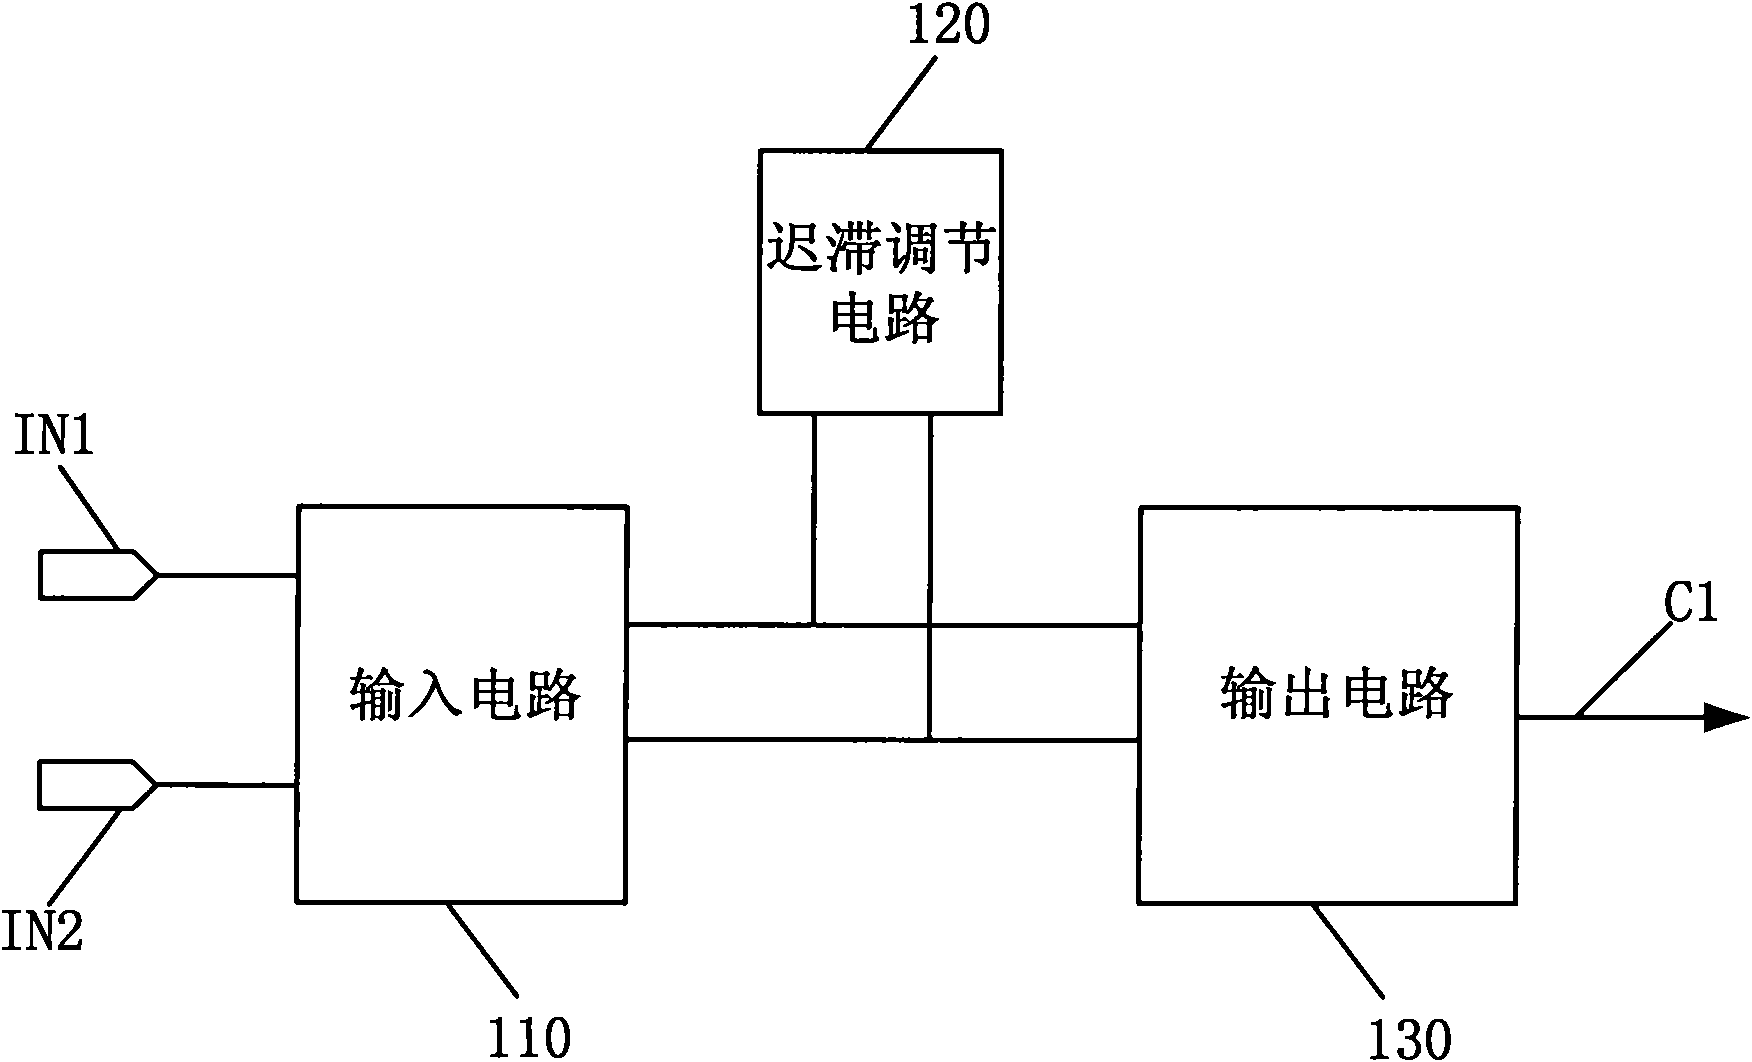 Comparator and D-class audio power amplifier comprising comparator